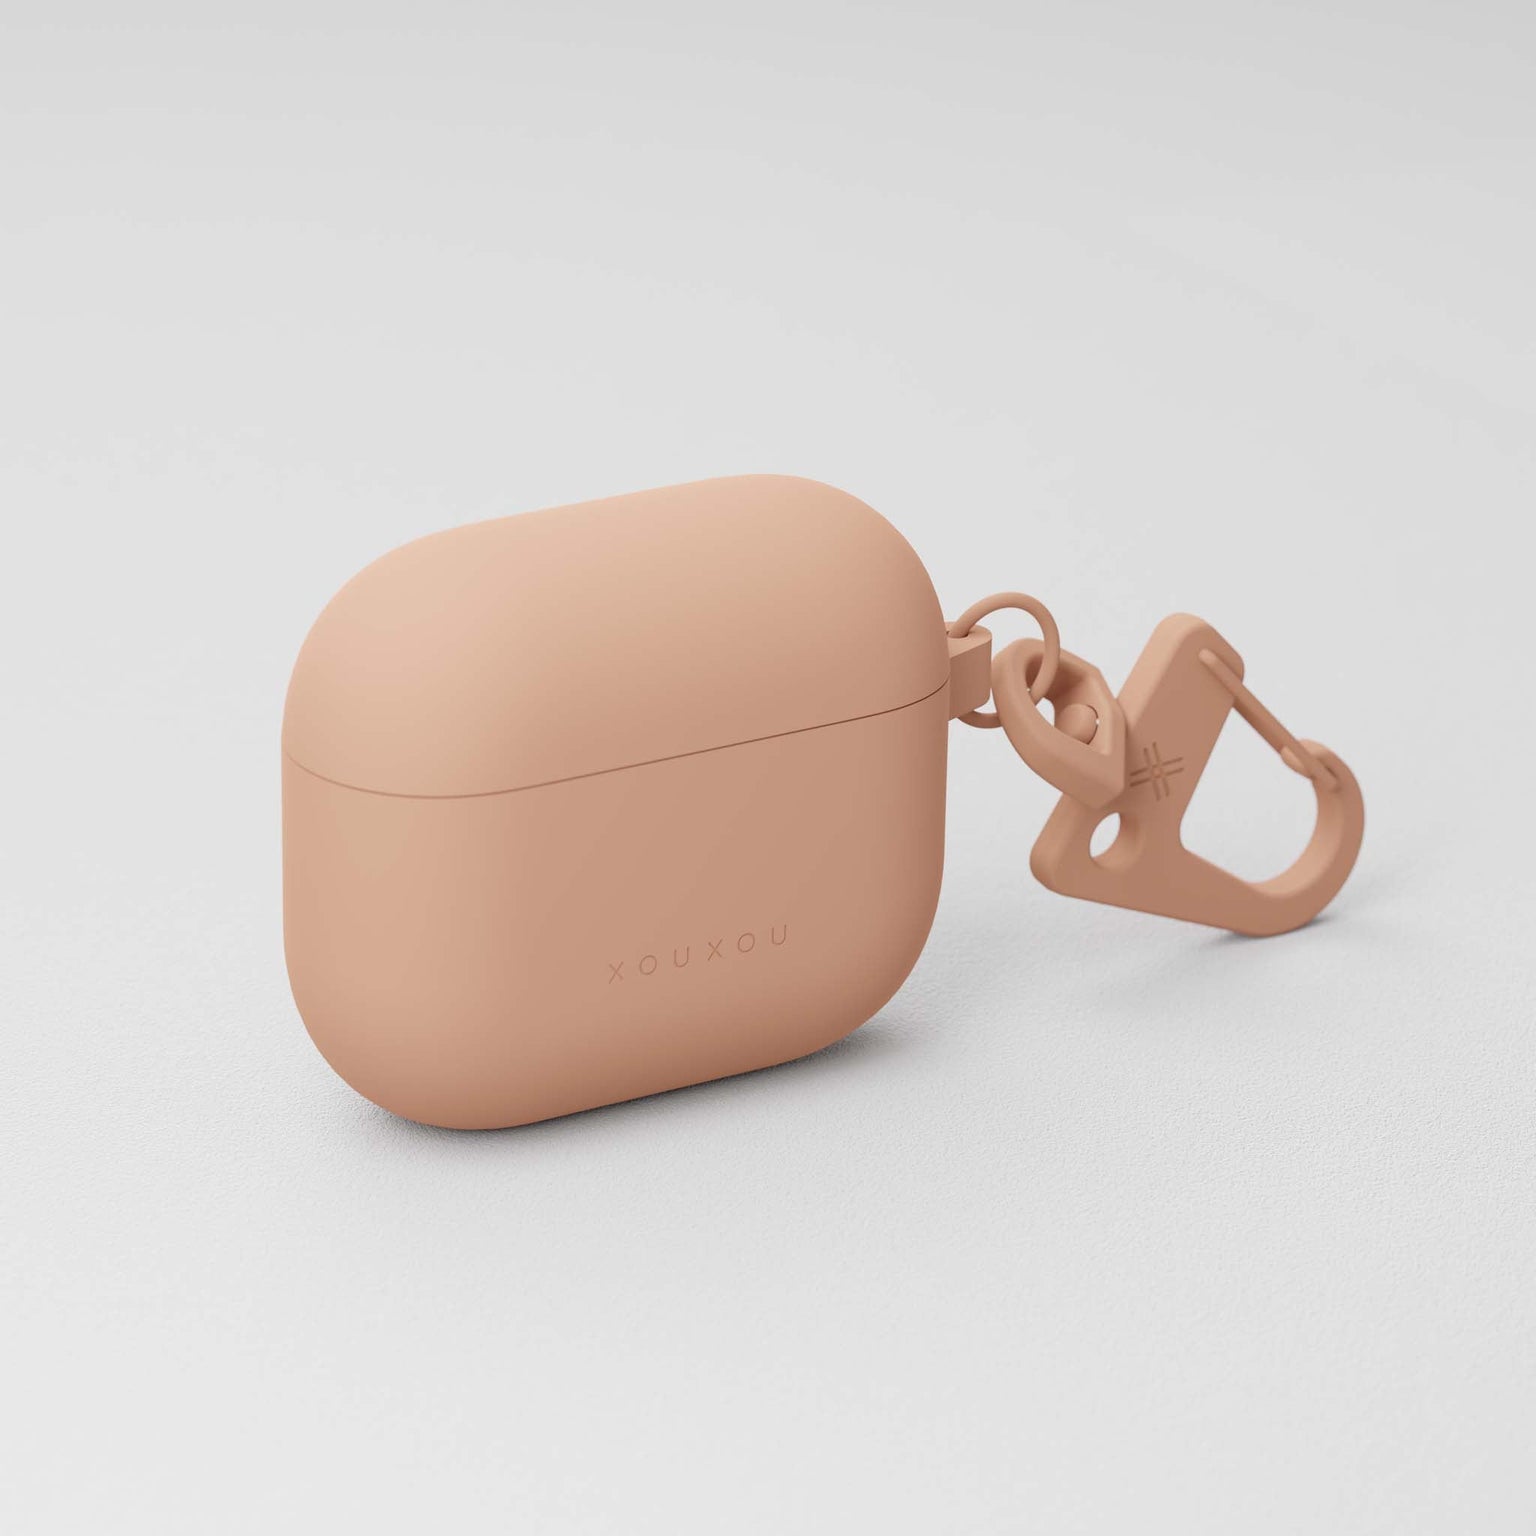 AirPods case third generation with matching carabiner in Powder Pink | XOUXOU